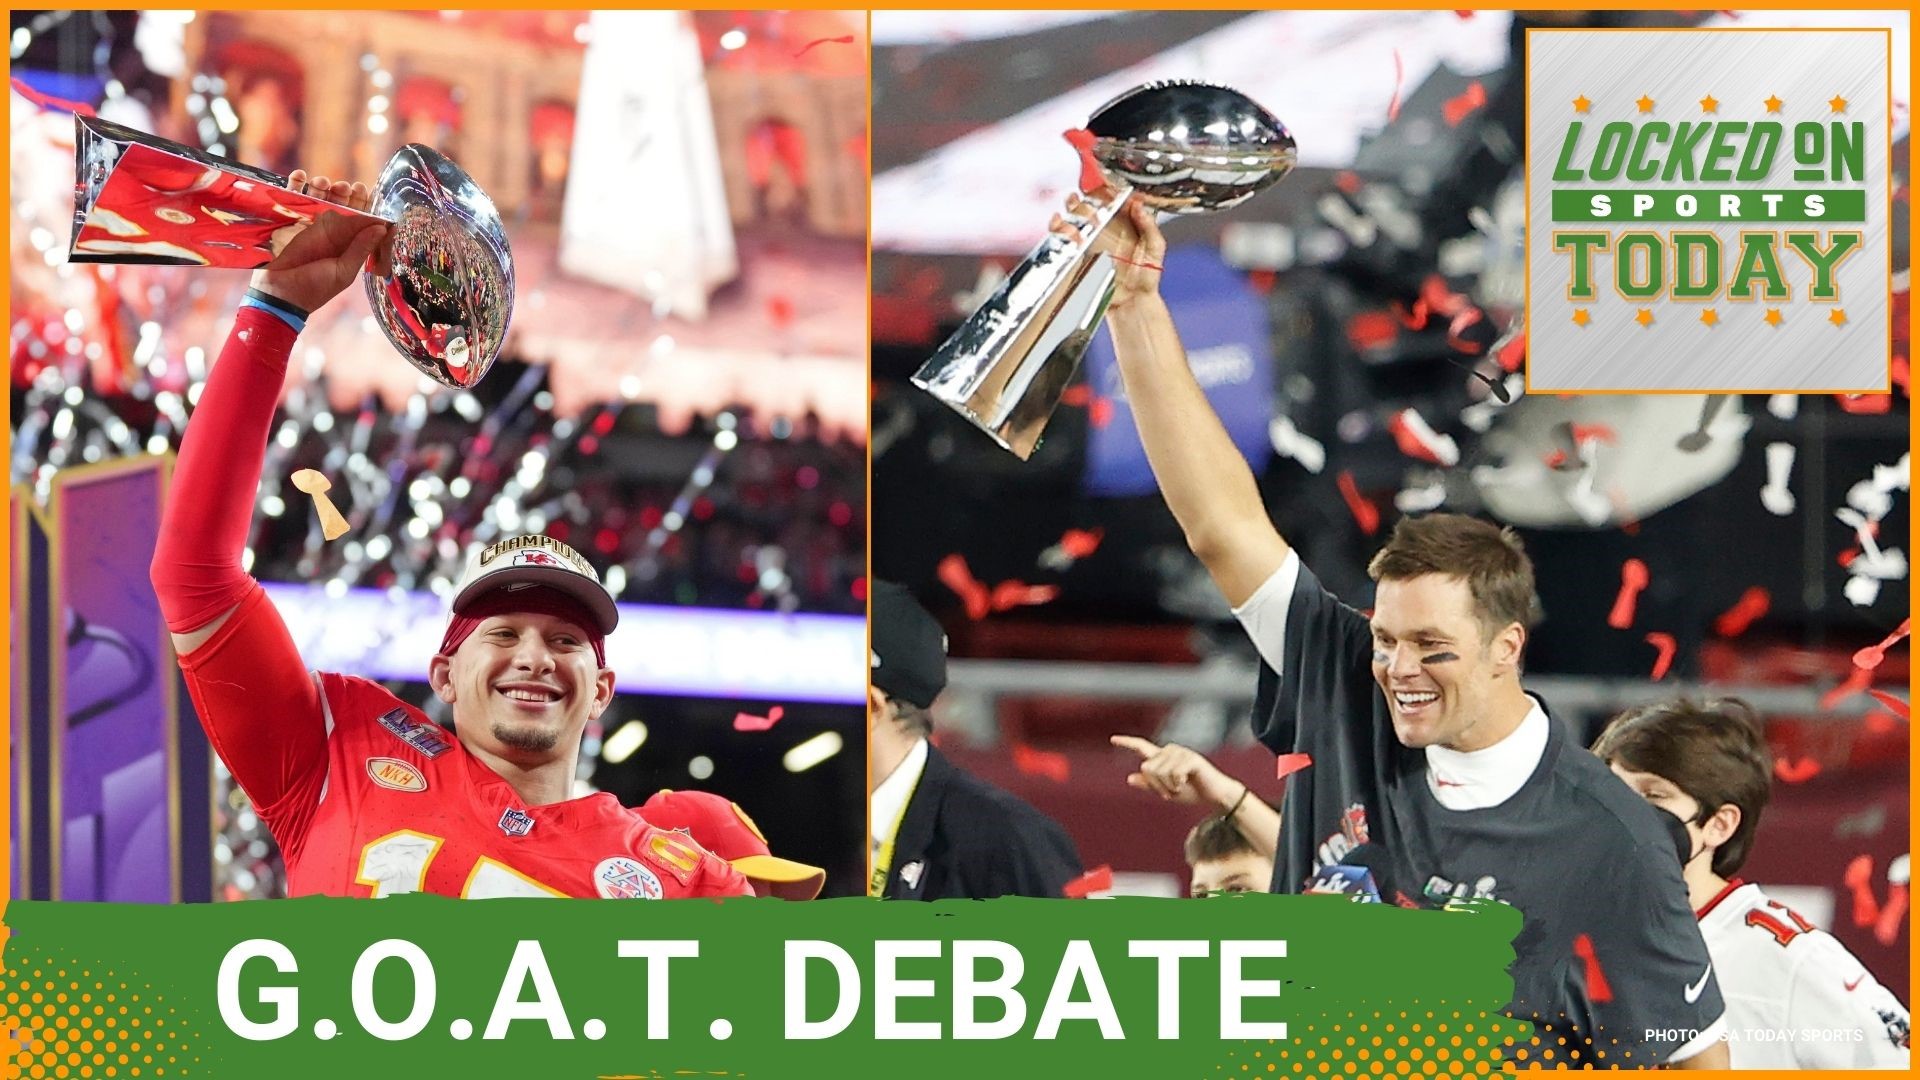 Discussing the day's top sports stories from the G.O.A.T. debate about Brady and Mahomes to changes coming to the Philadelphia Eagles.